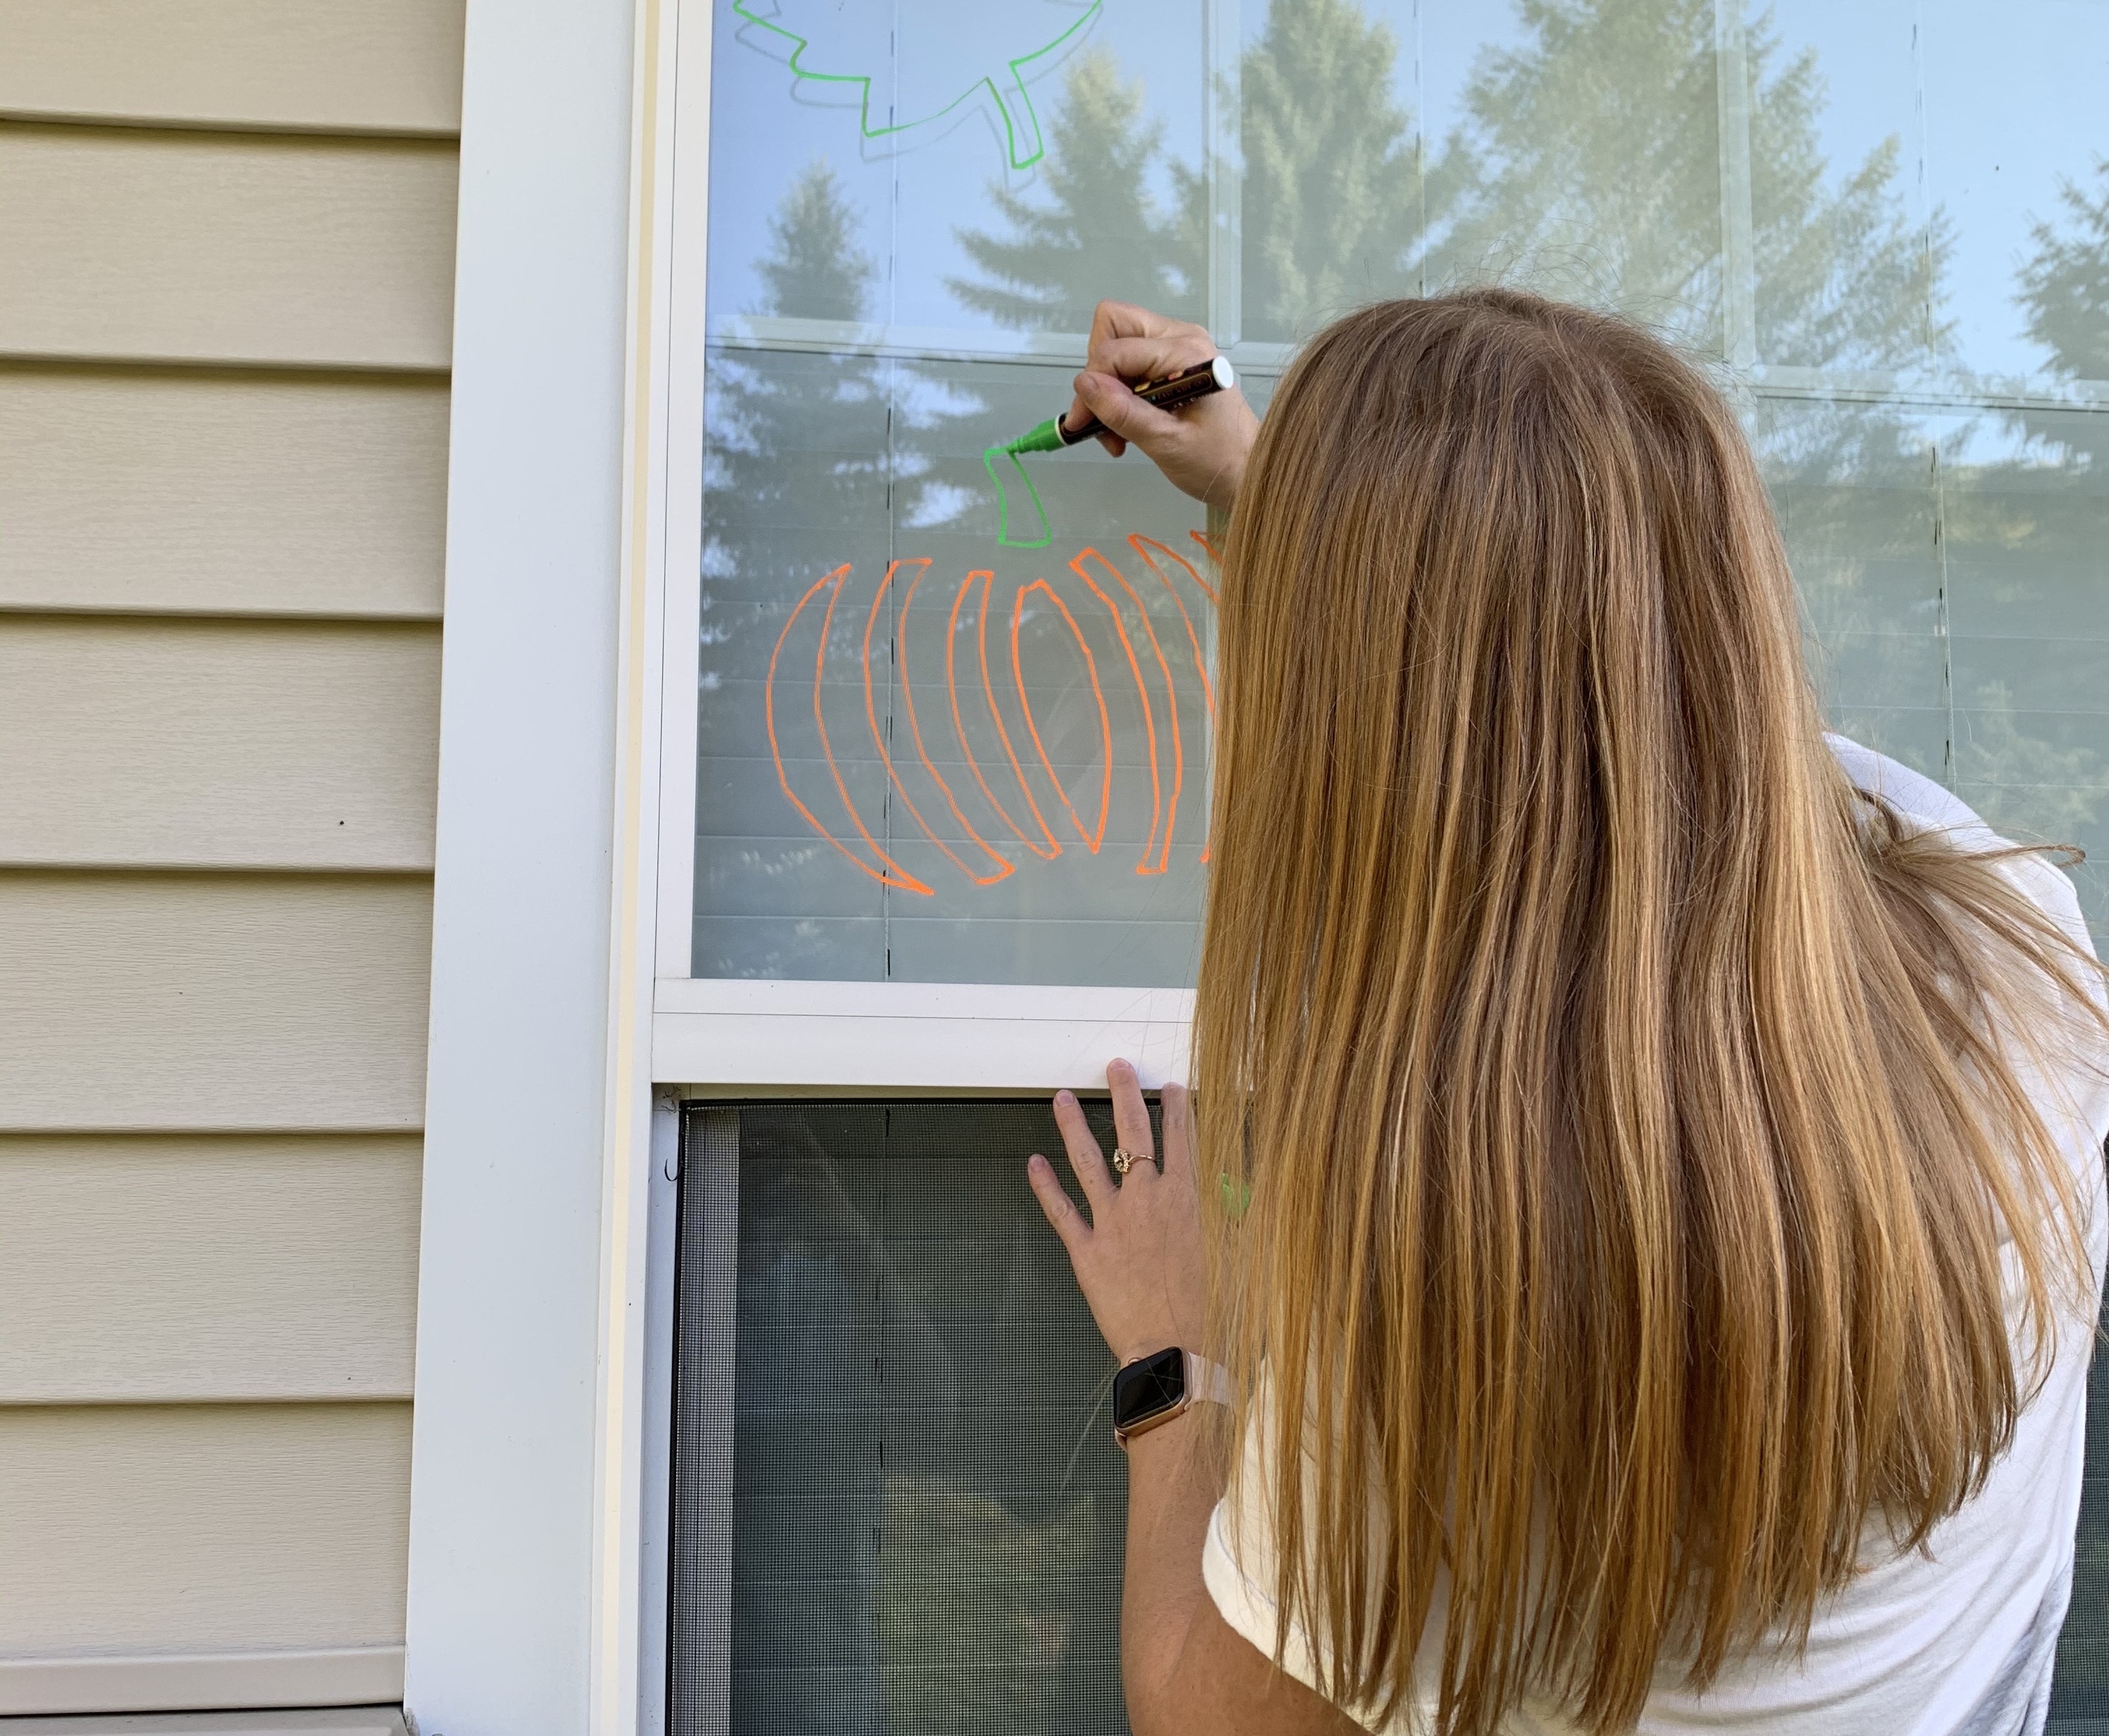 student drawing on window